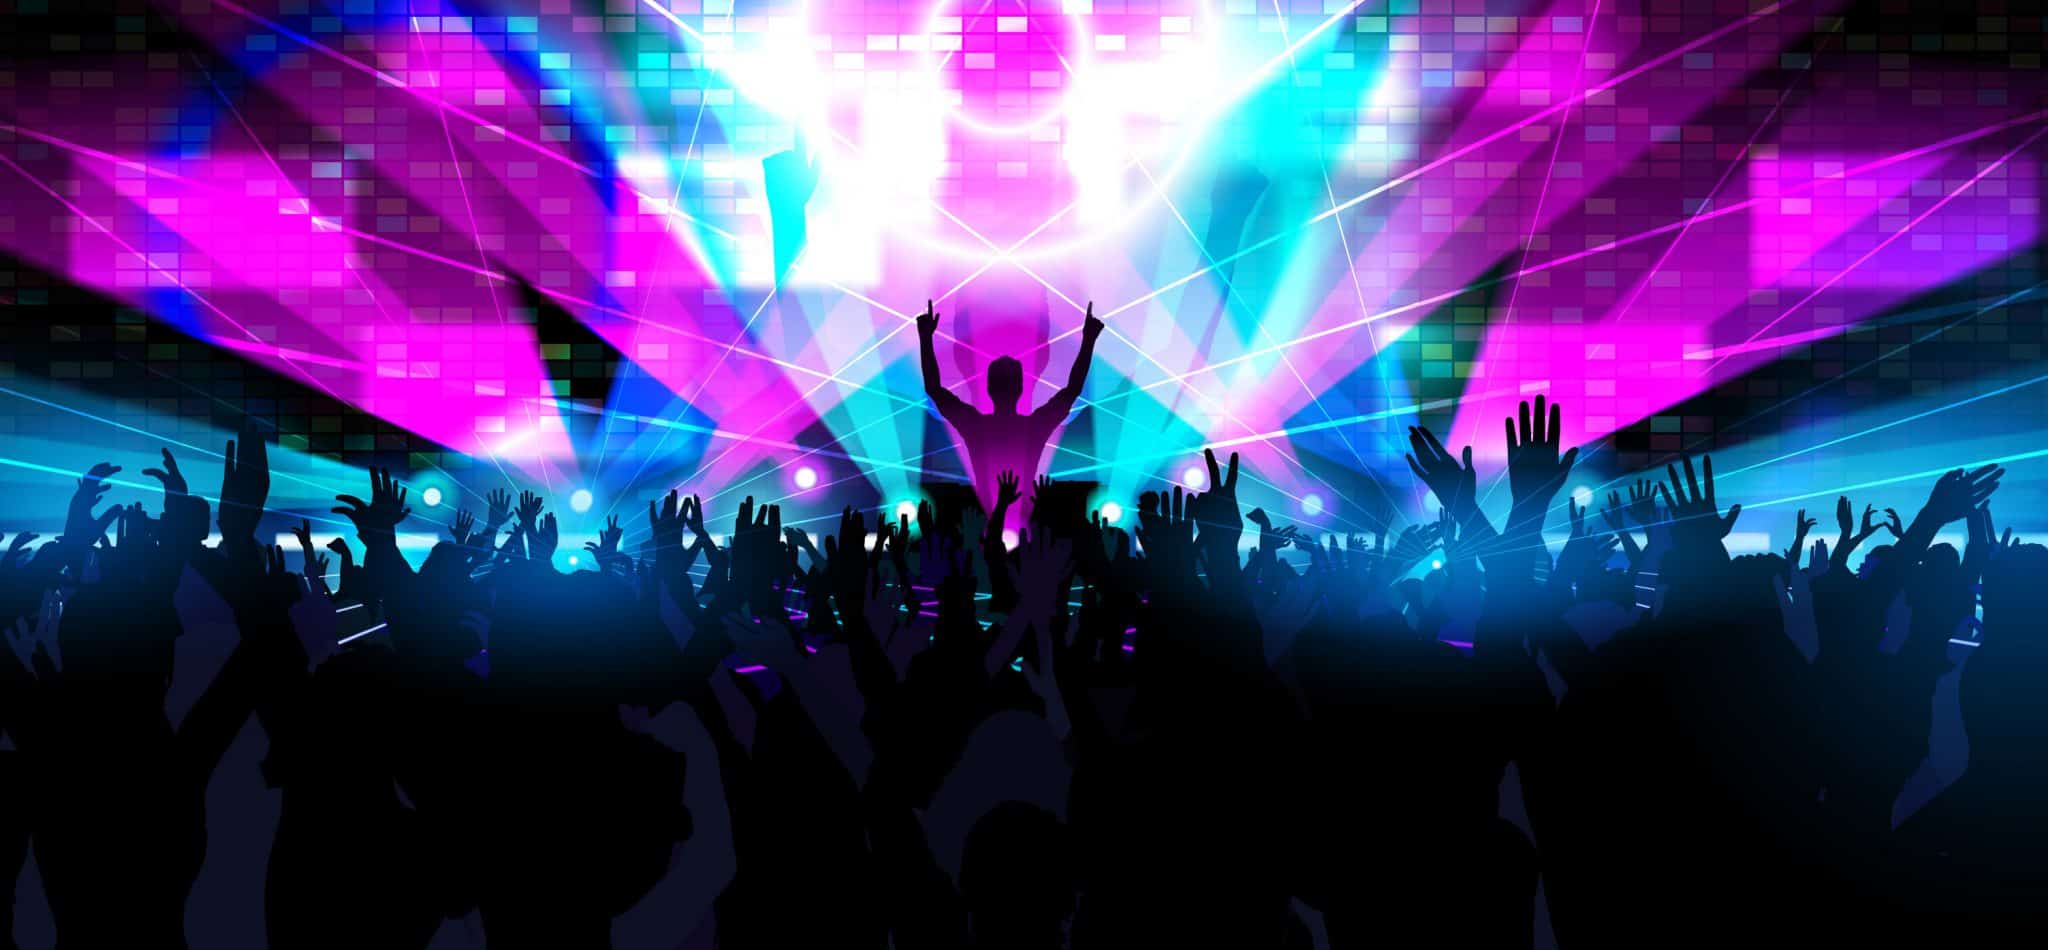 Electronic-dance-music-festival-with-silhouettes-of-happy-dancing-people-with-raised-hands-2048x950.jpg